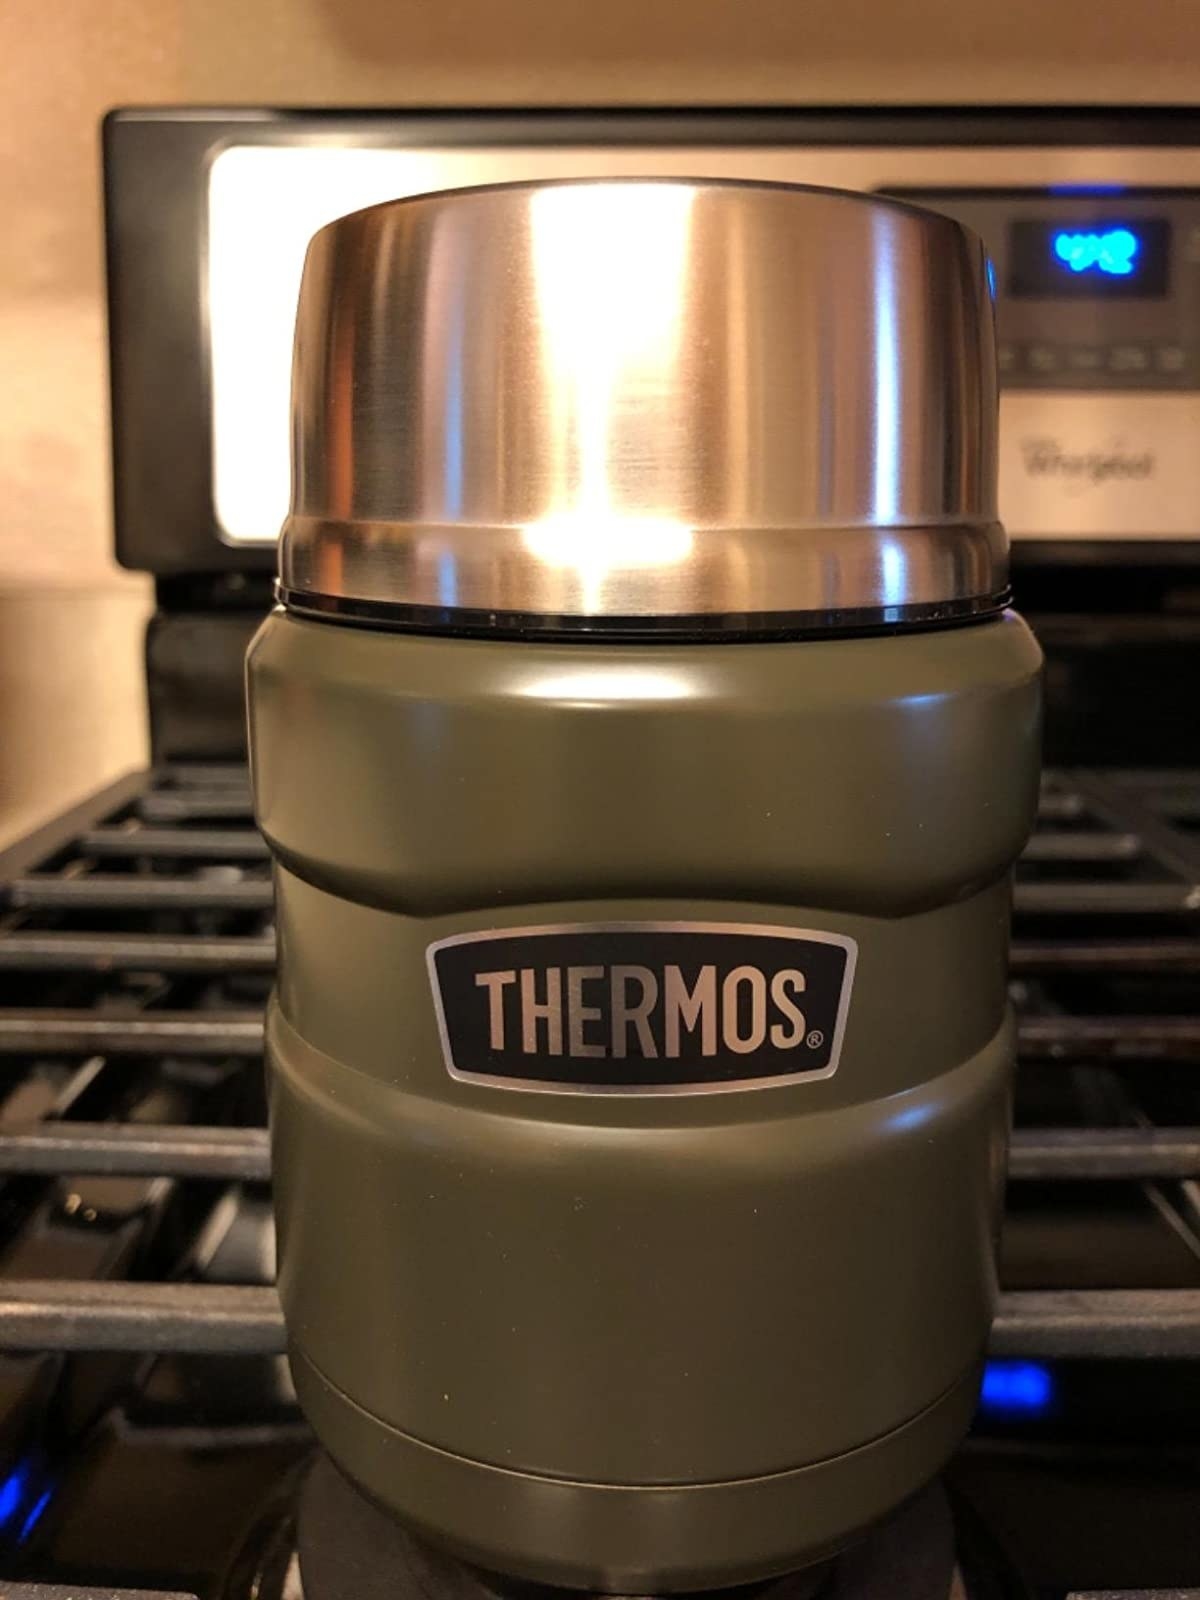 the green thermos